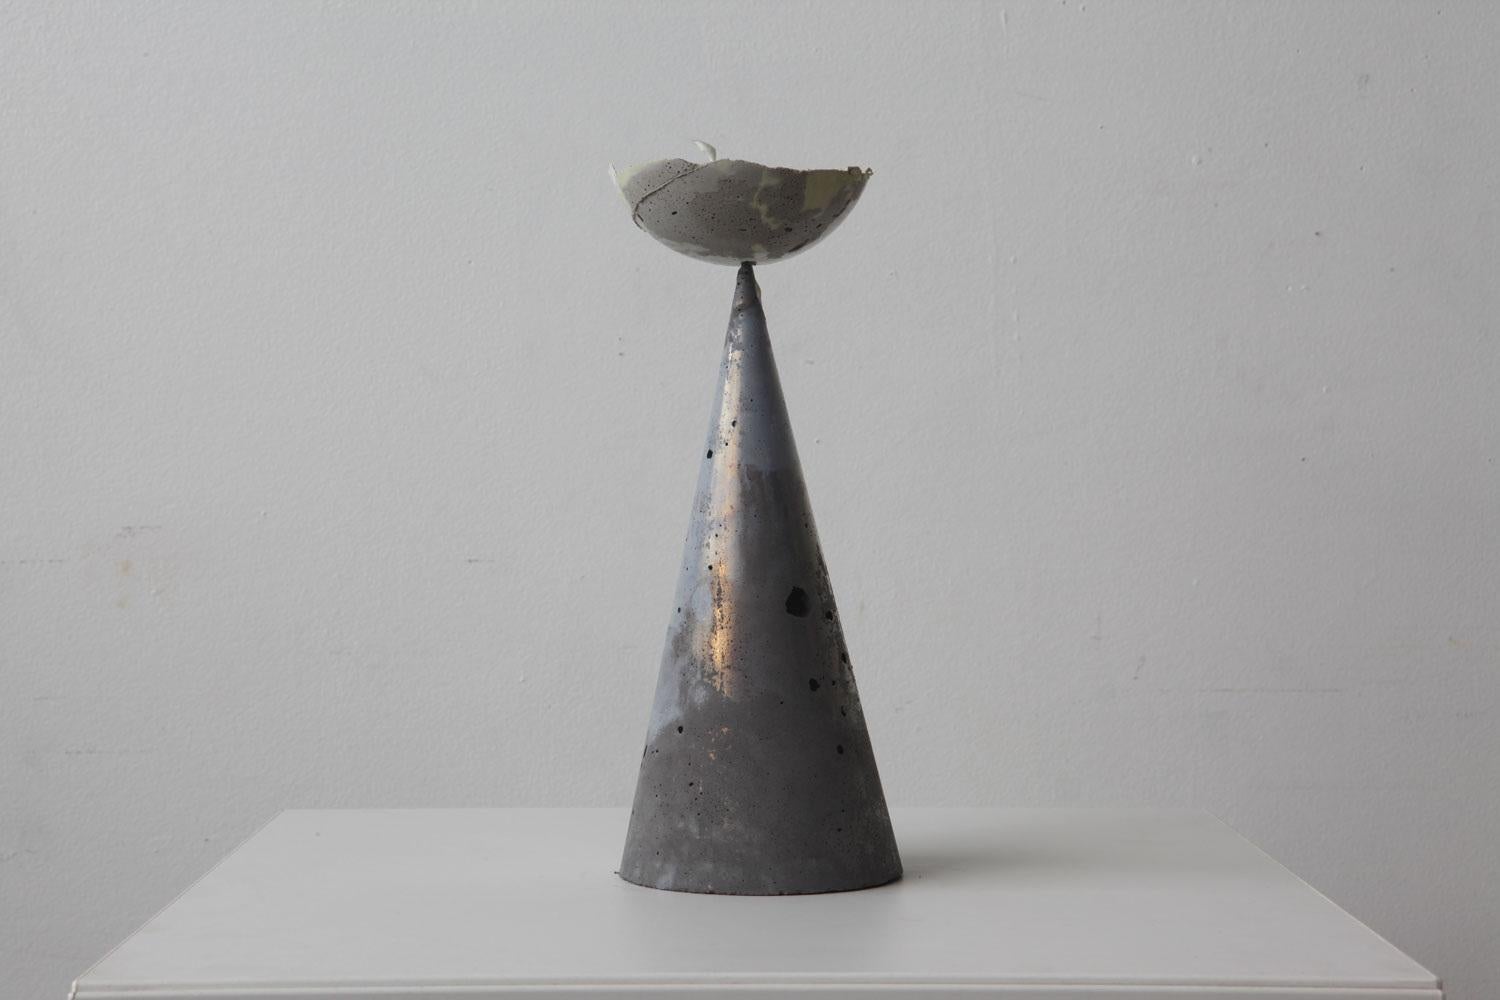 Moon Flower (2019) is a small contemporary abstract sculpture, featuring a concrete cone, with weathered details to create a rugged effect. Expertly balanced on the tip of the rectangular prism is a half-moon prism, thus giving it the name Moon